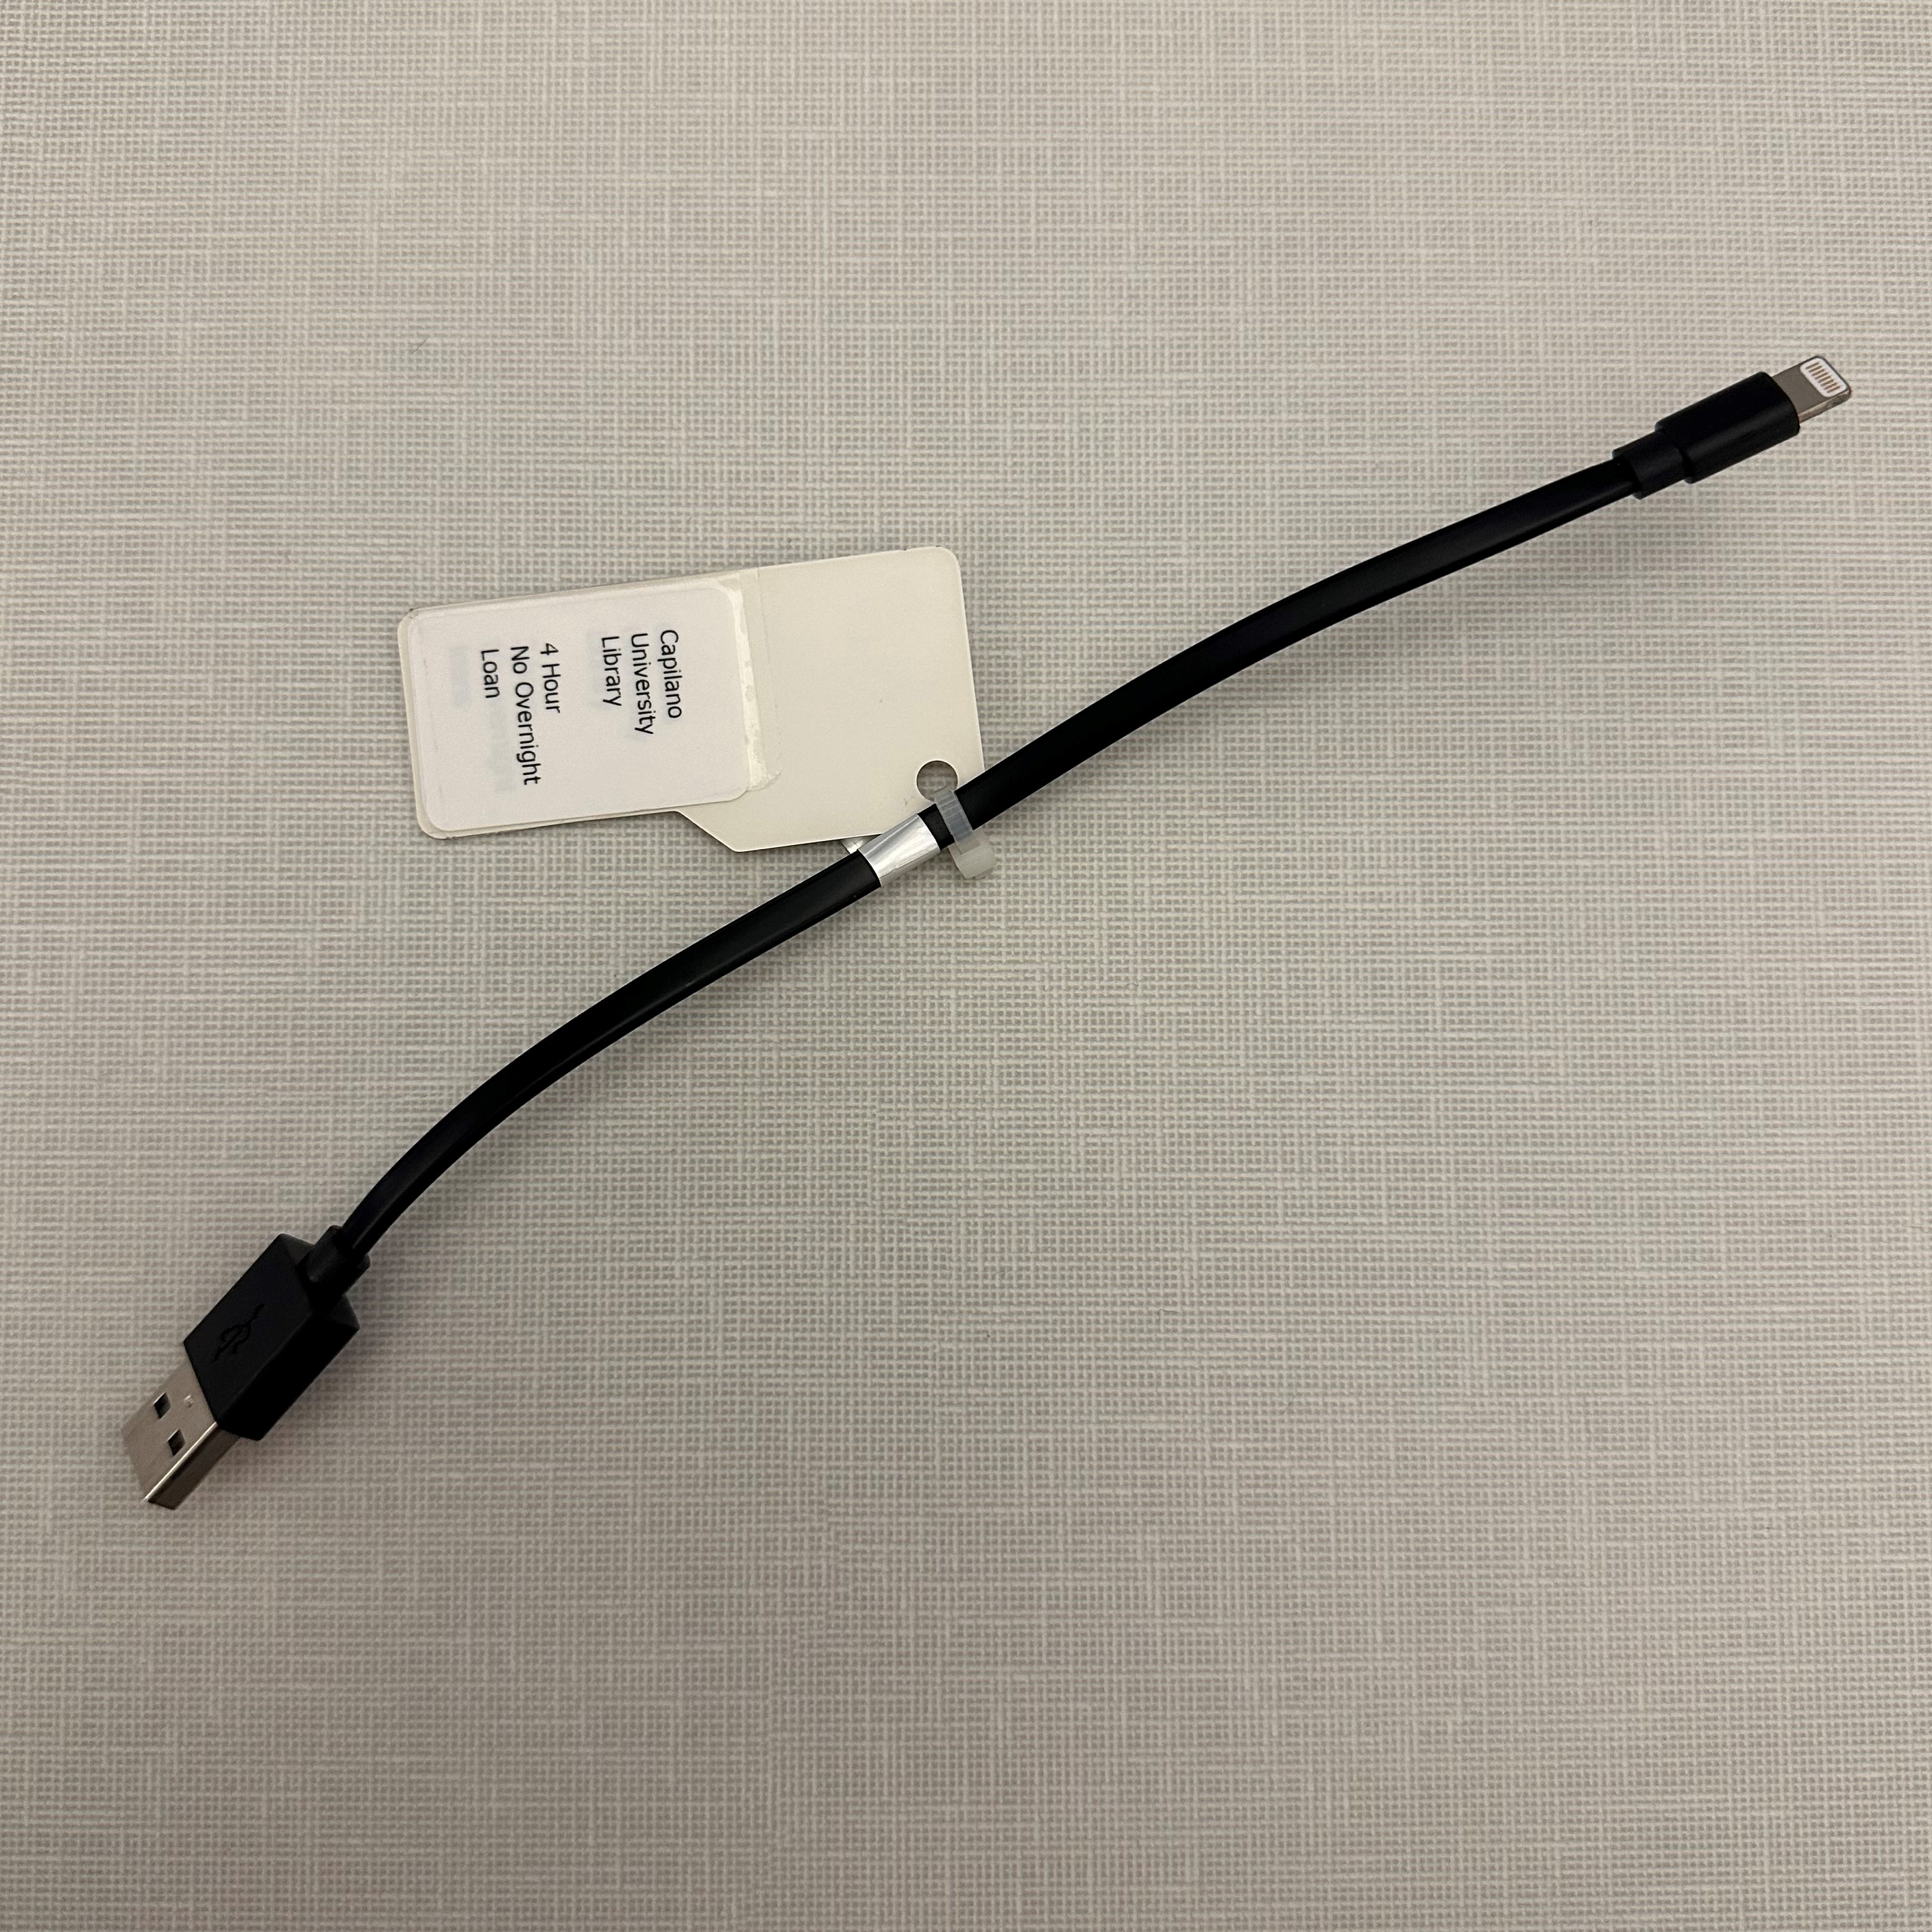 Black lightning charger cable